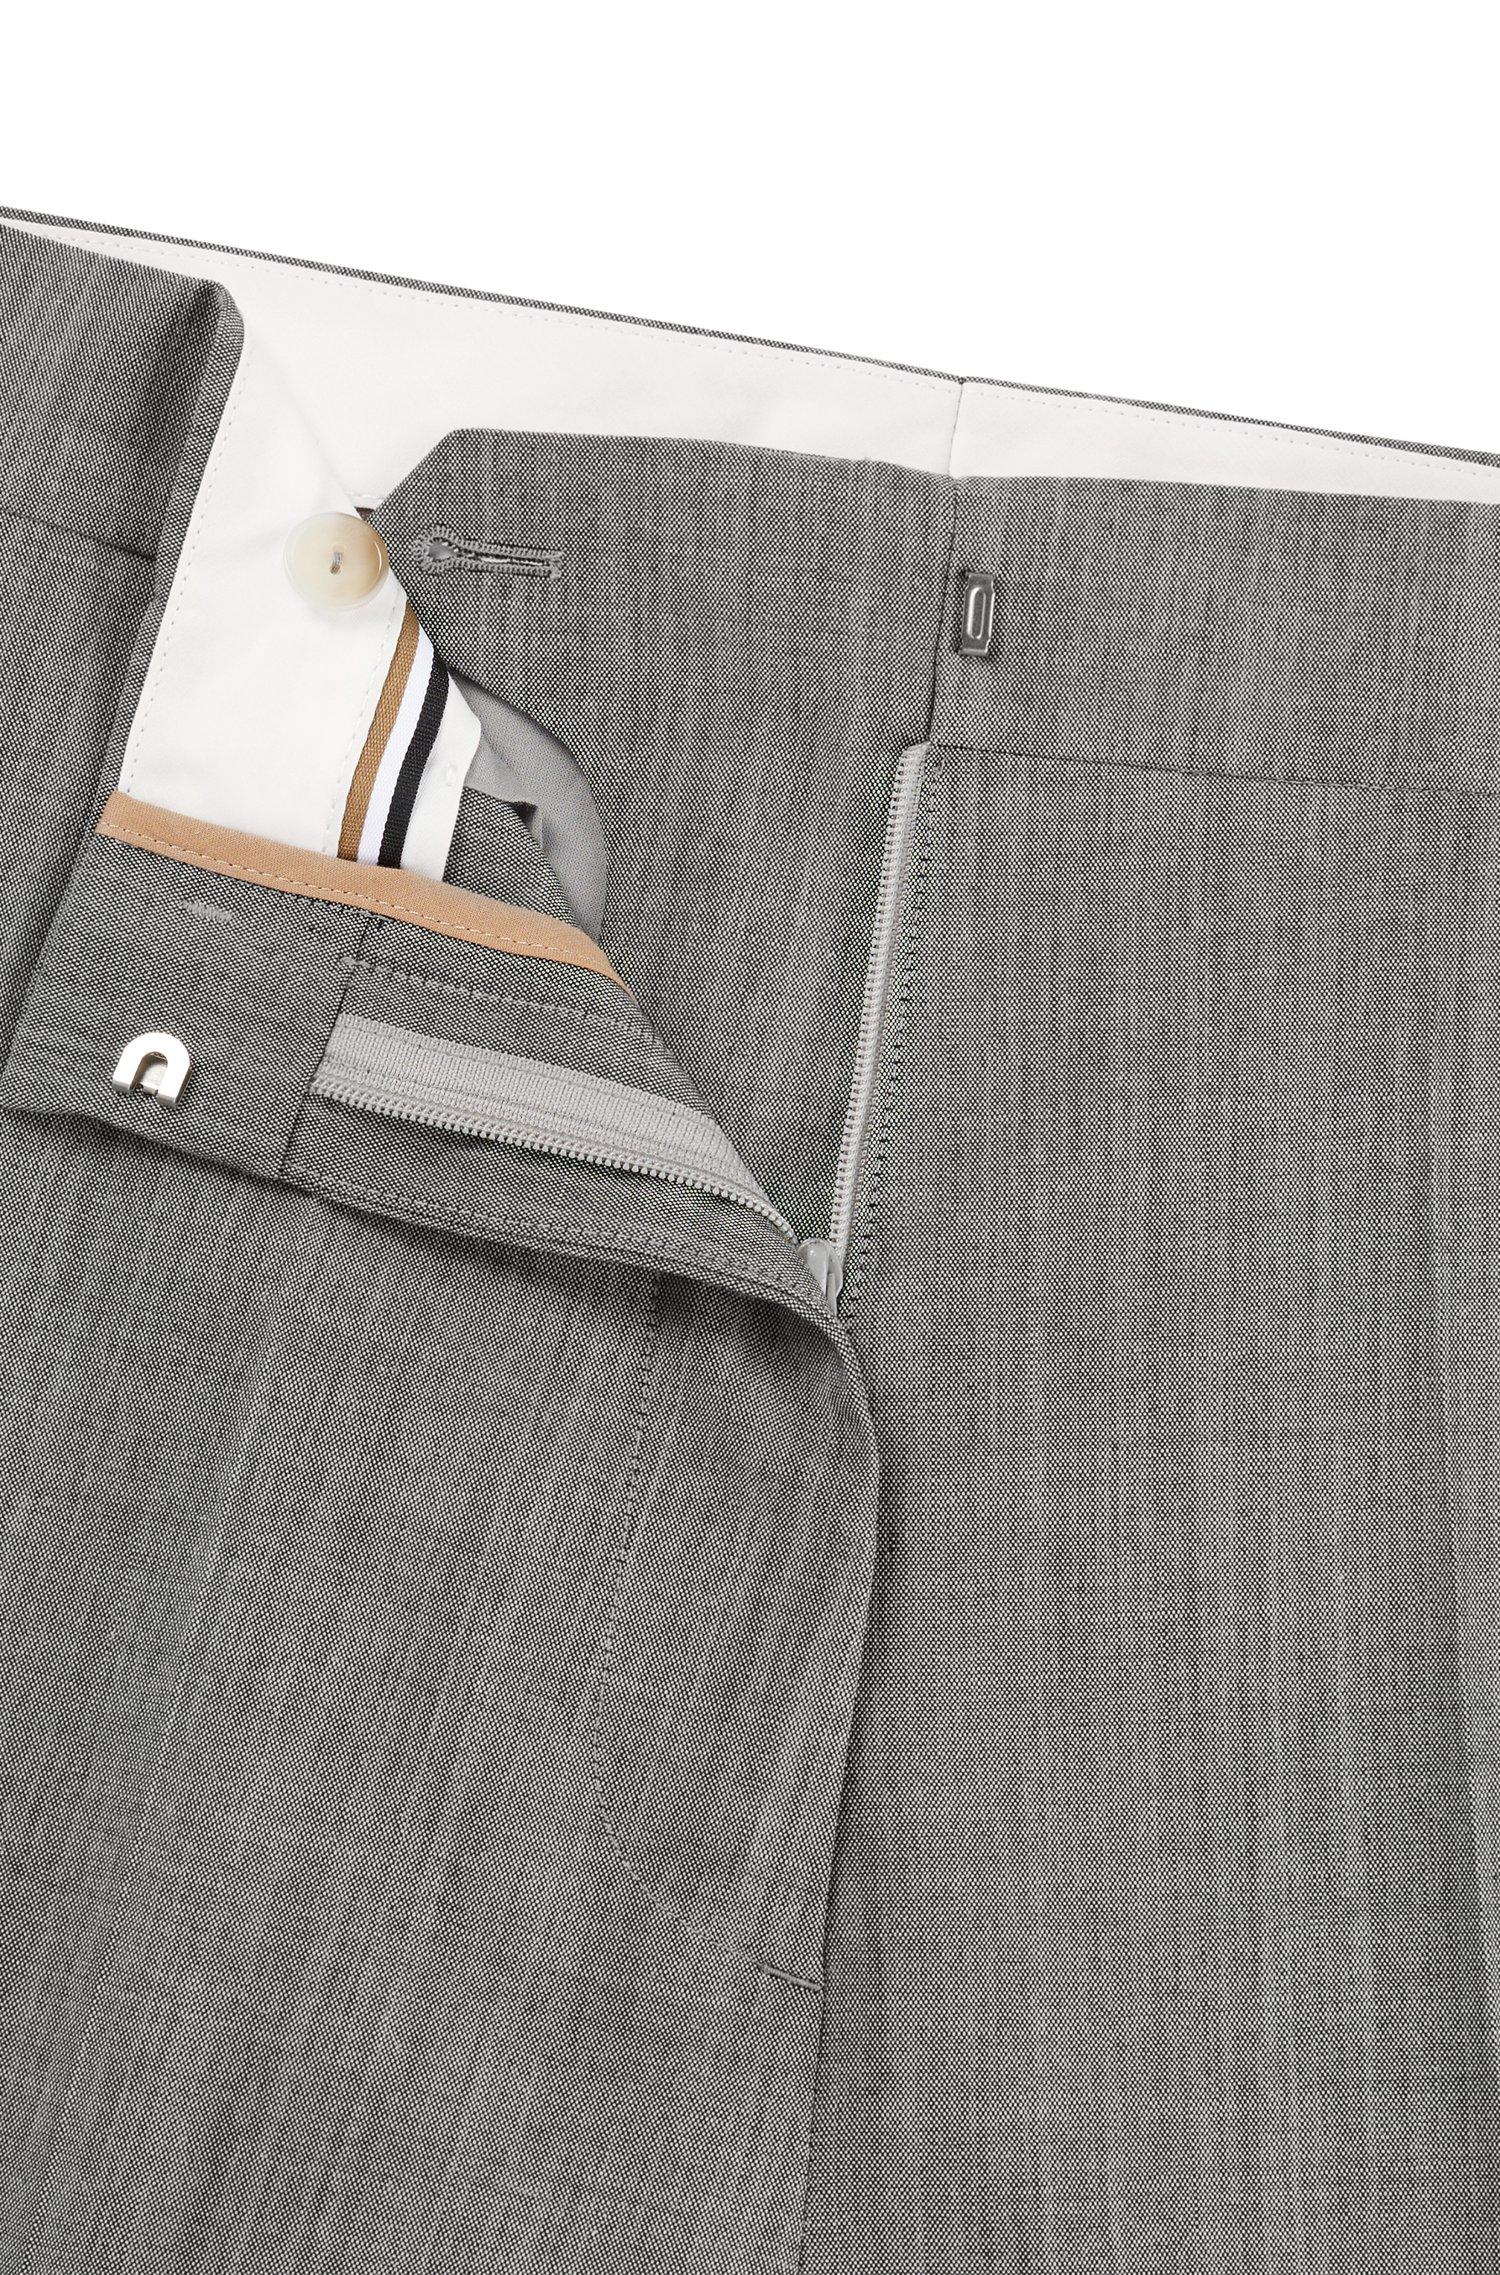 Noak Tower Hill super skinny suit trousers in grey worsted wool blend  with stretch  ASOS